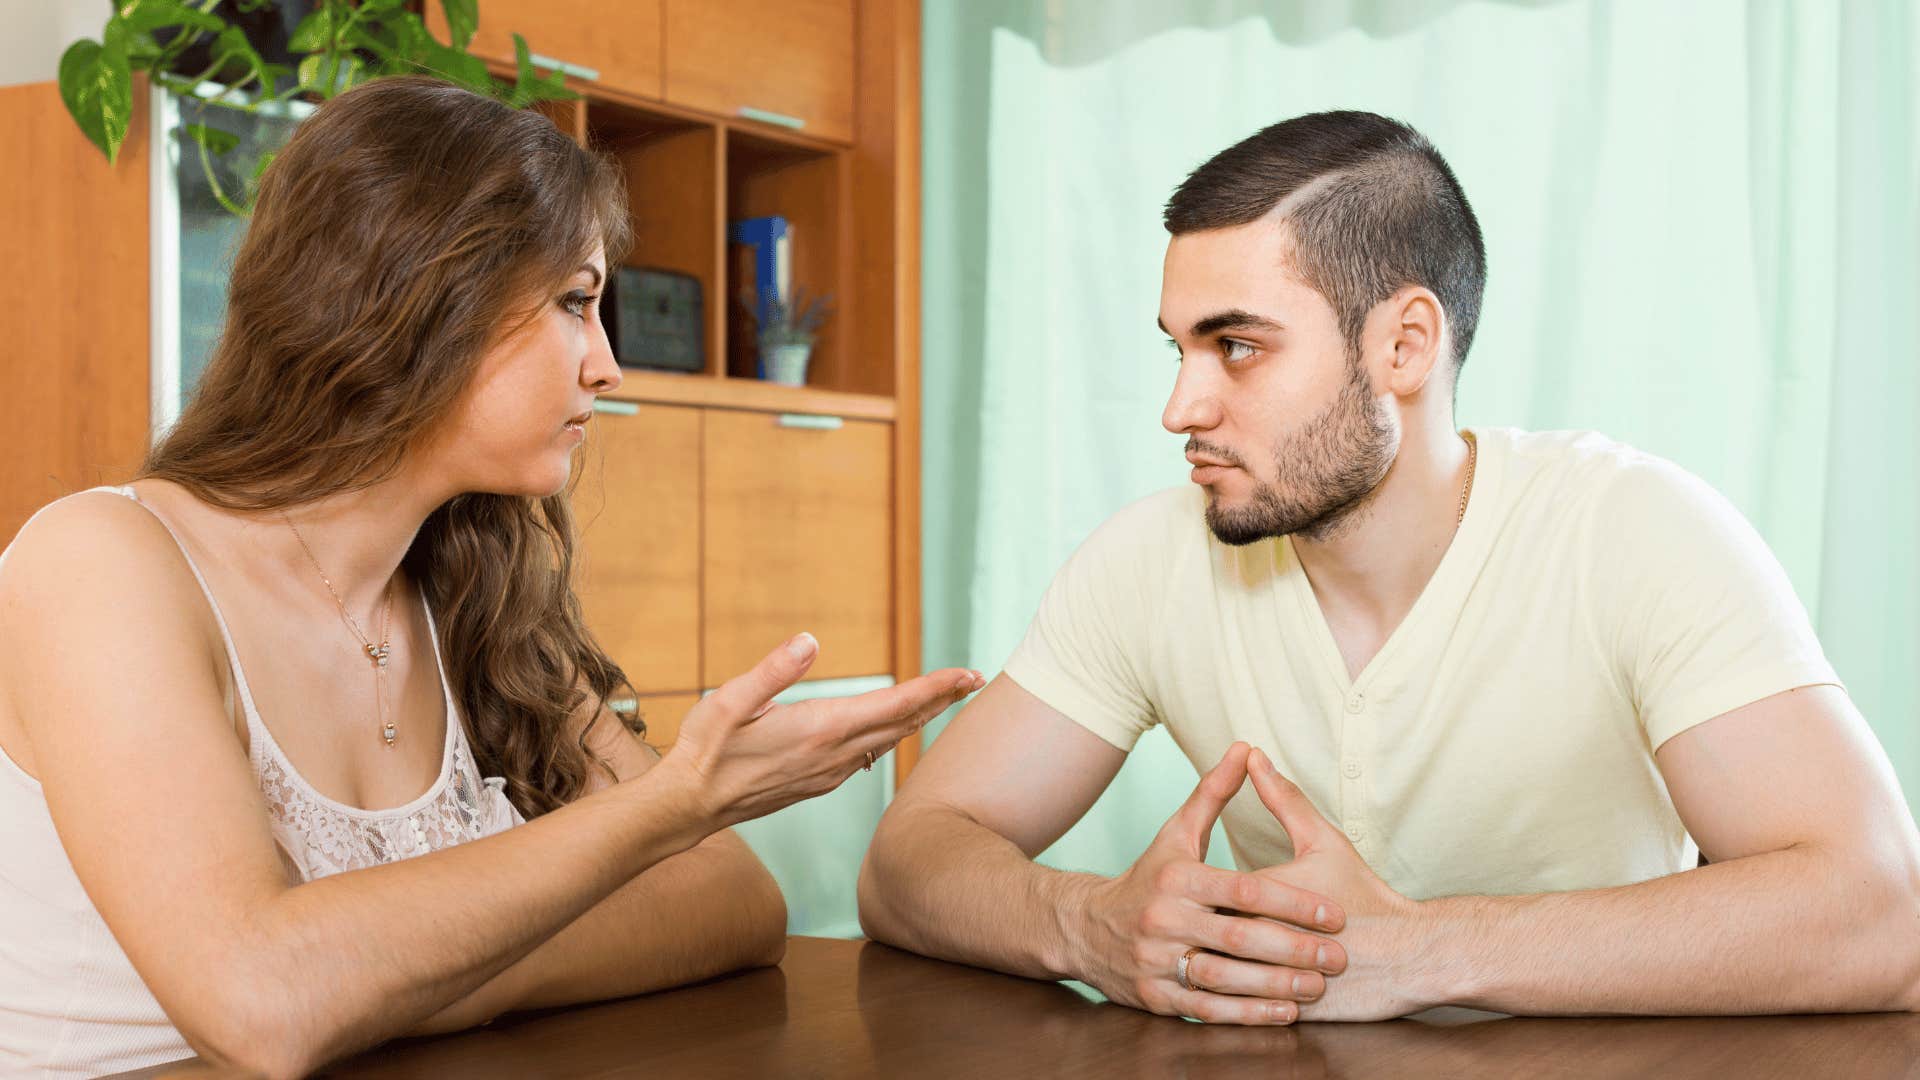 man staying calm during argument